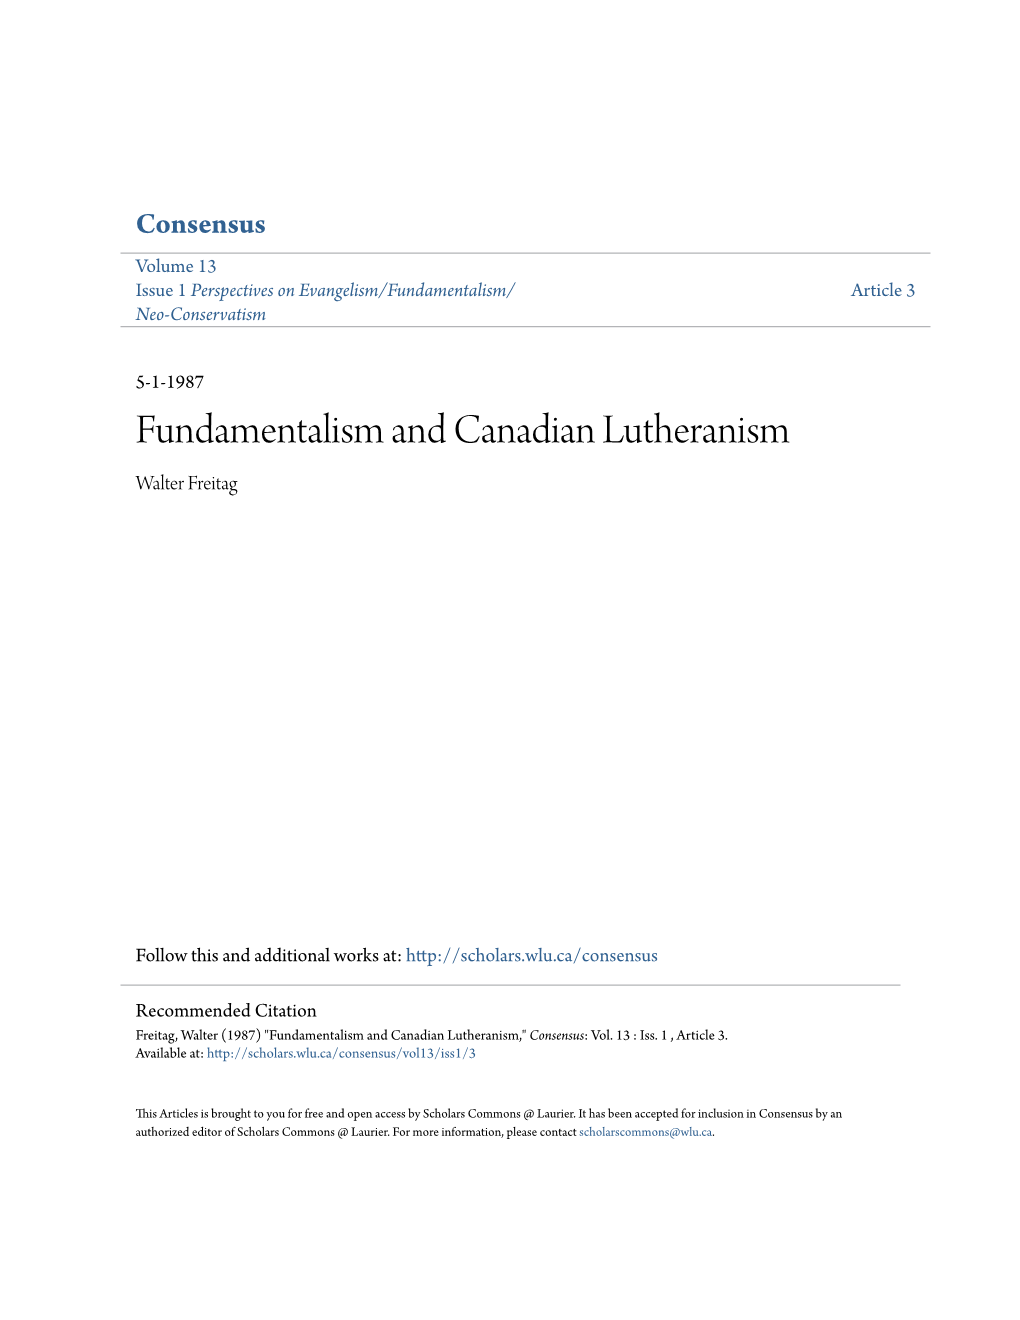 Fundamentalism and Canadian Lutheranism Walter Freitag